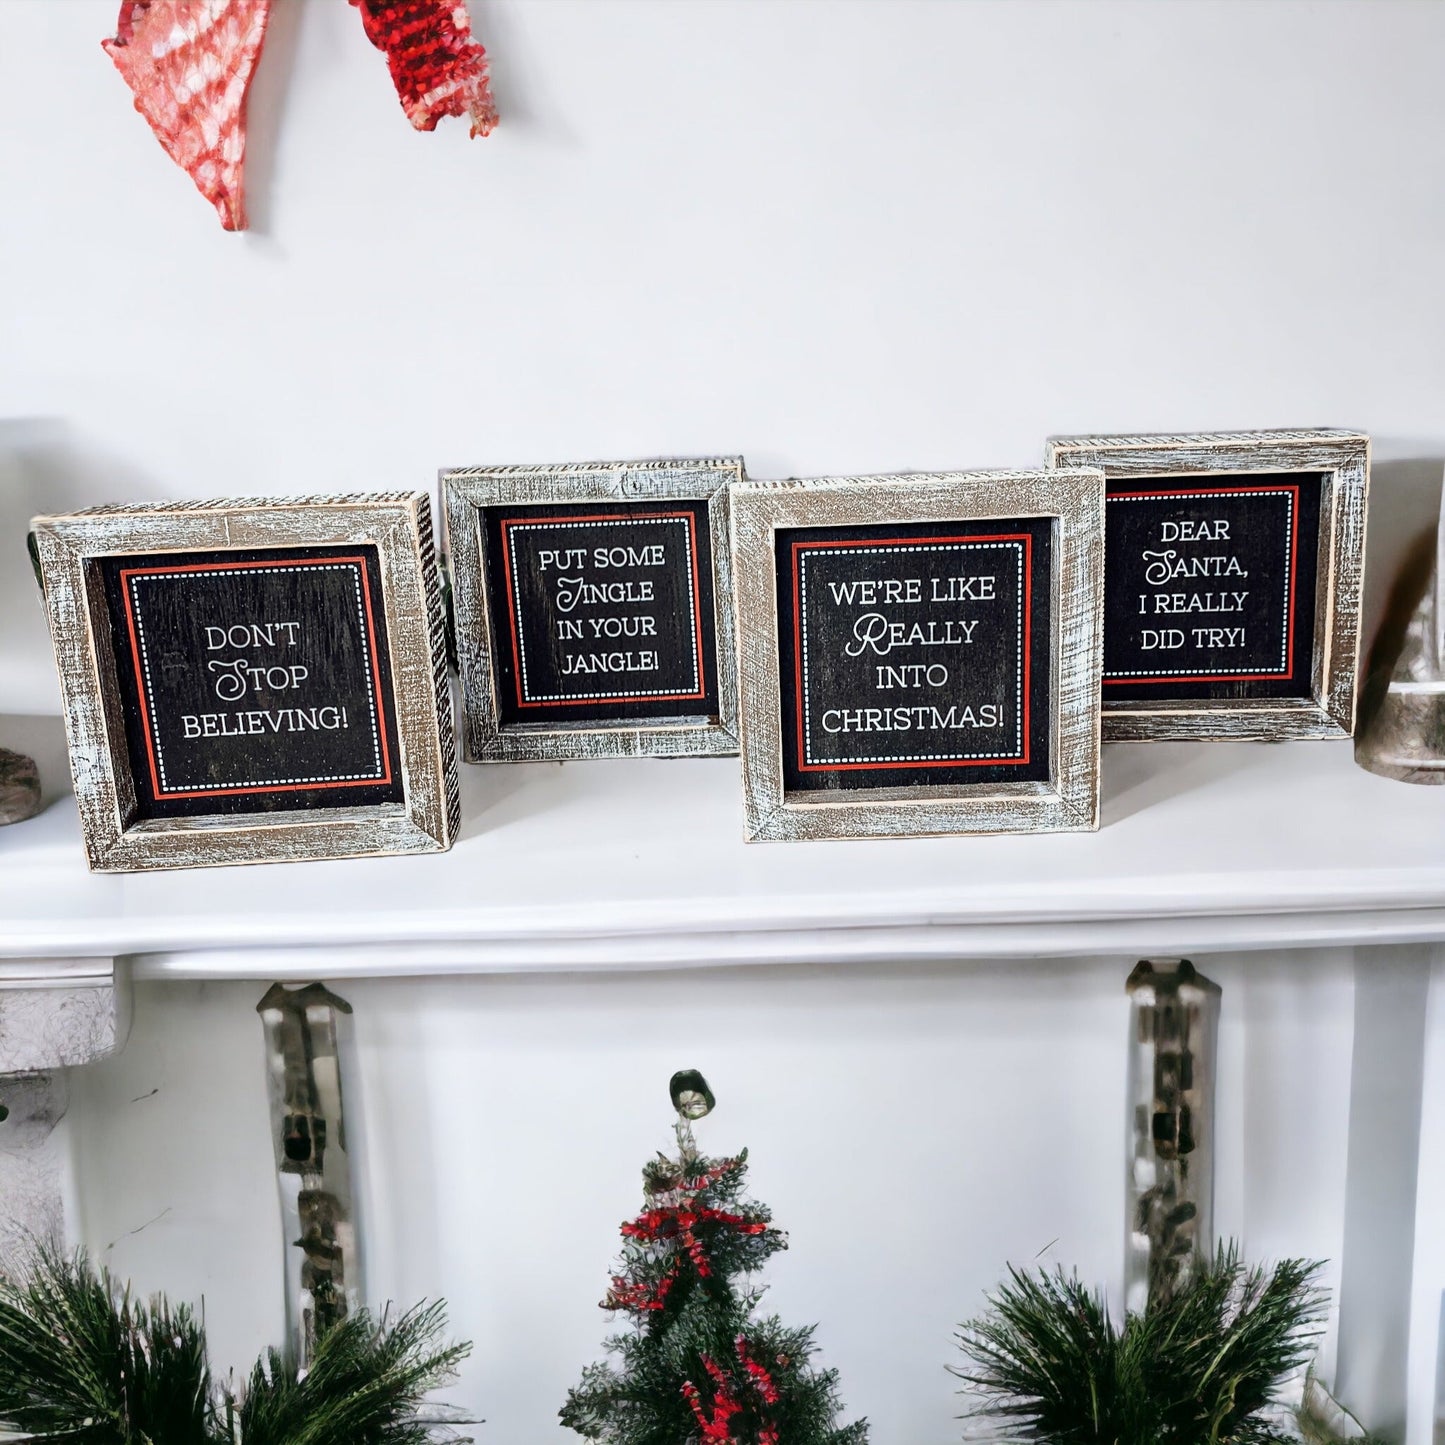 Cute black red and white Christmas decorations, Christmas signs with funny quotes